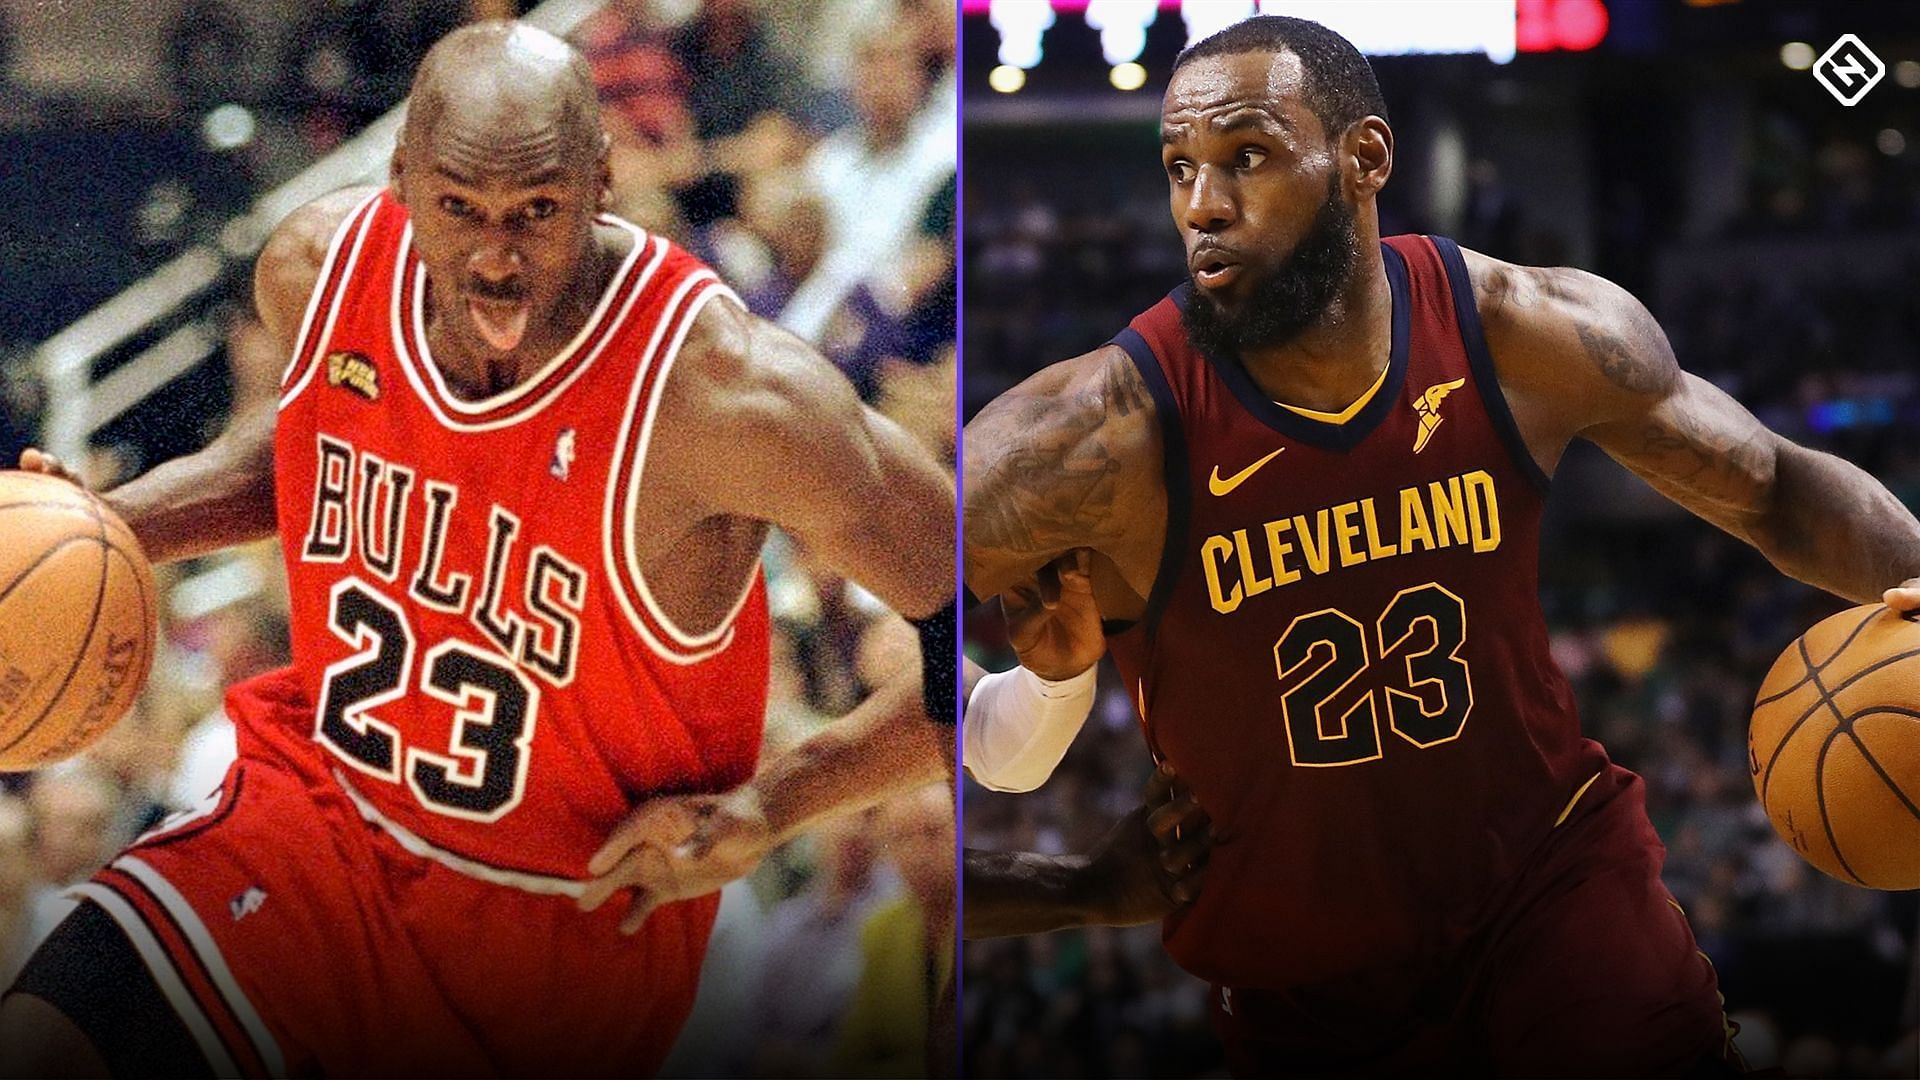 Some basketball fans consider Michael Jordan&#039;s competitiveness as his biggest edge over LeBron James. [Photo: Sporting News]